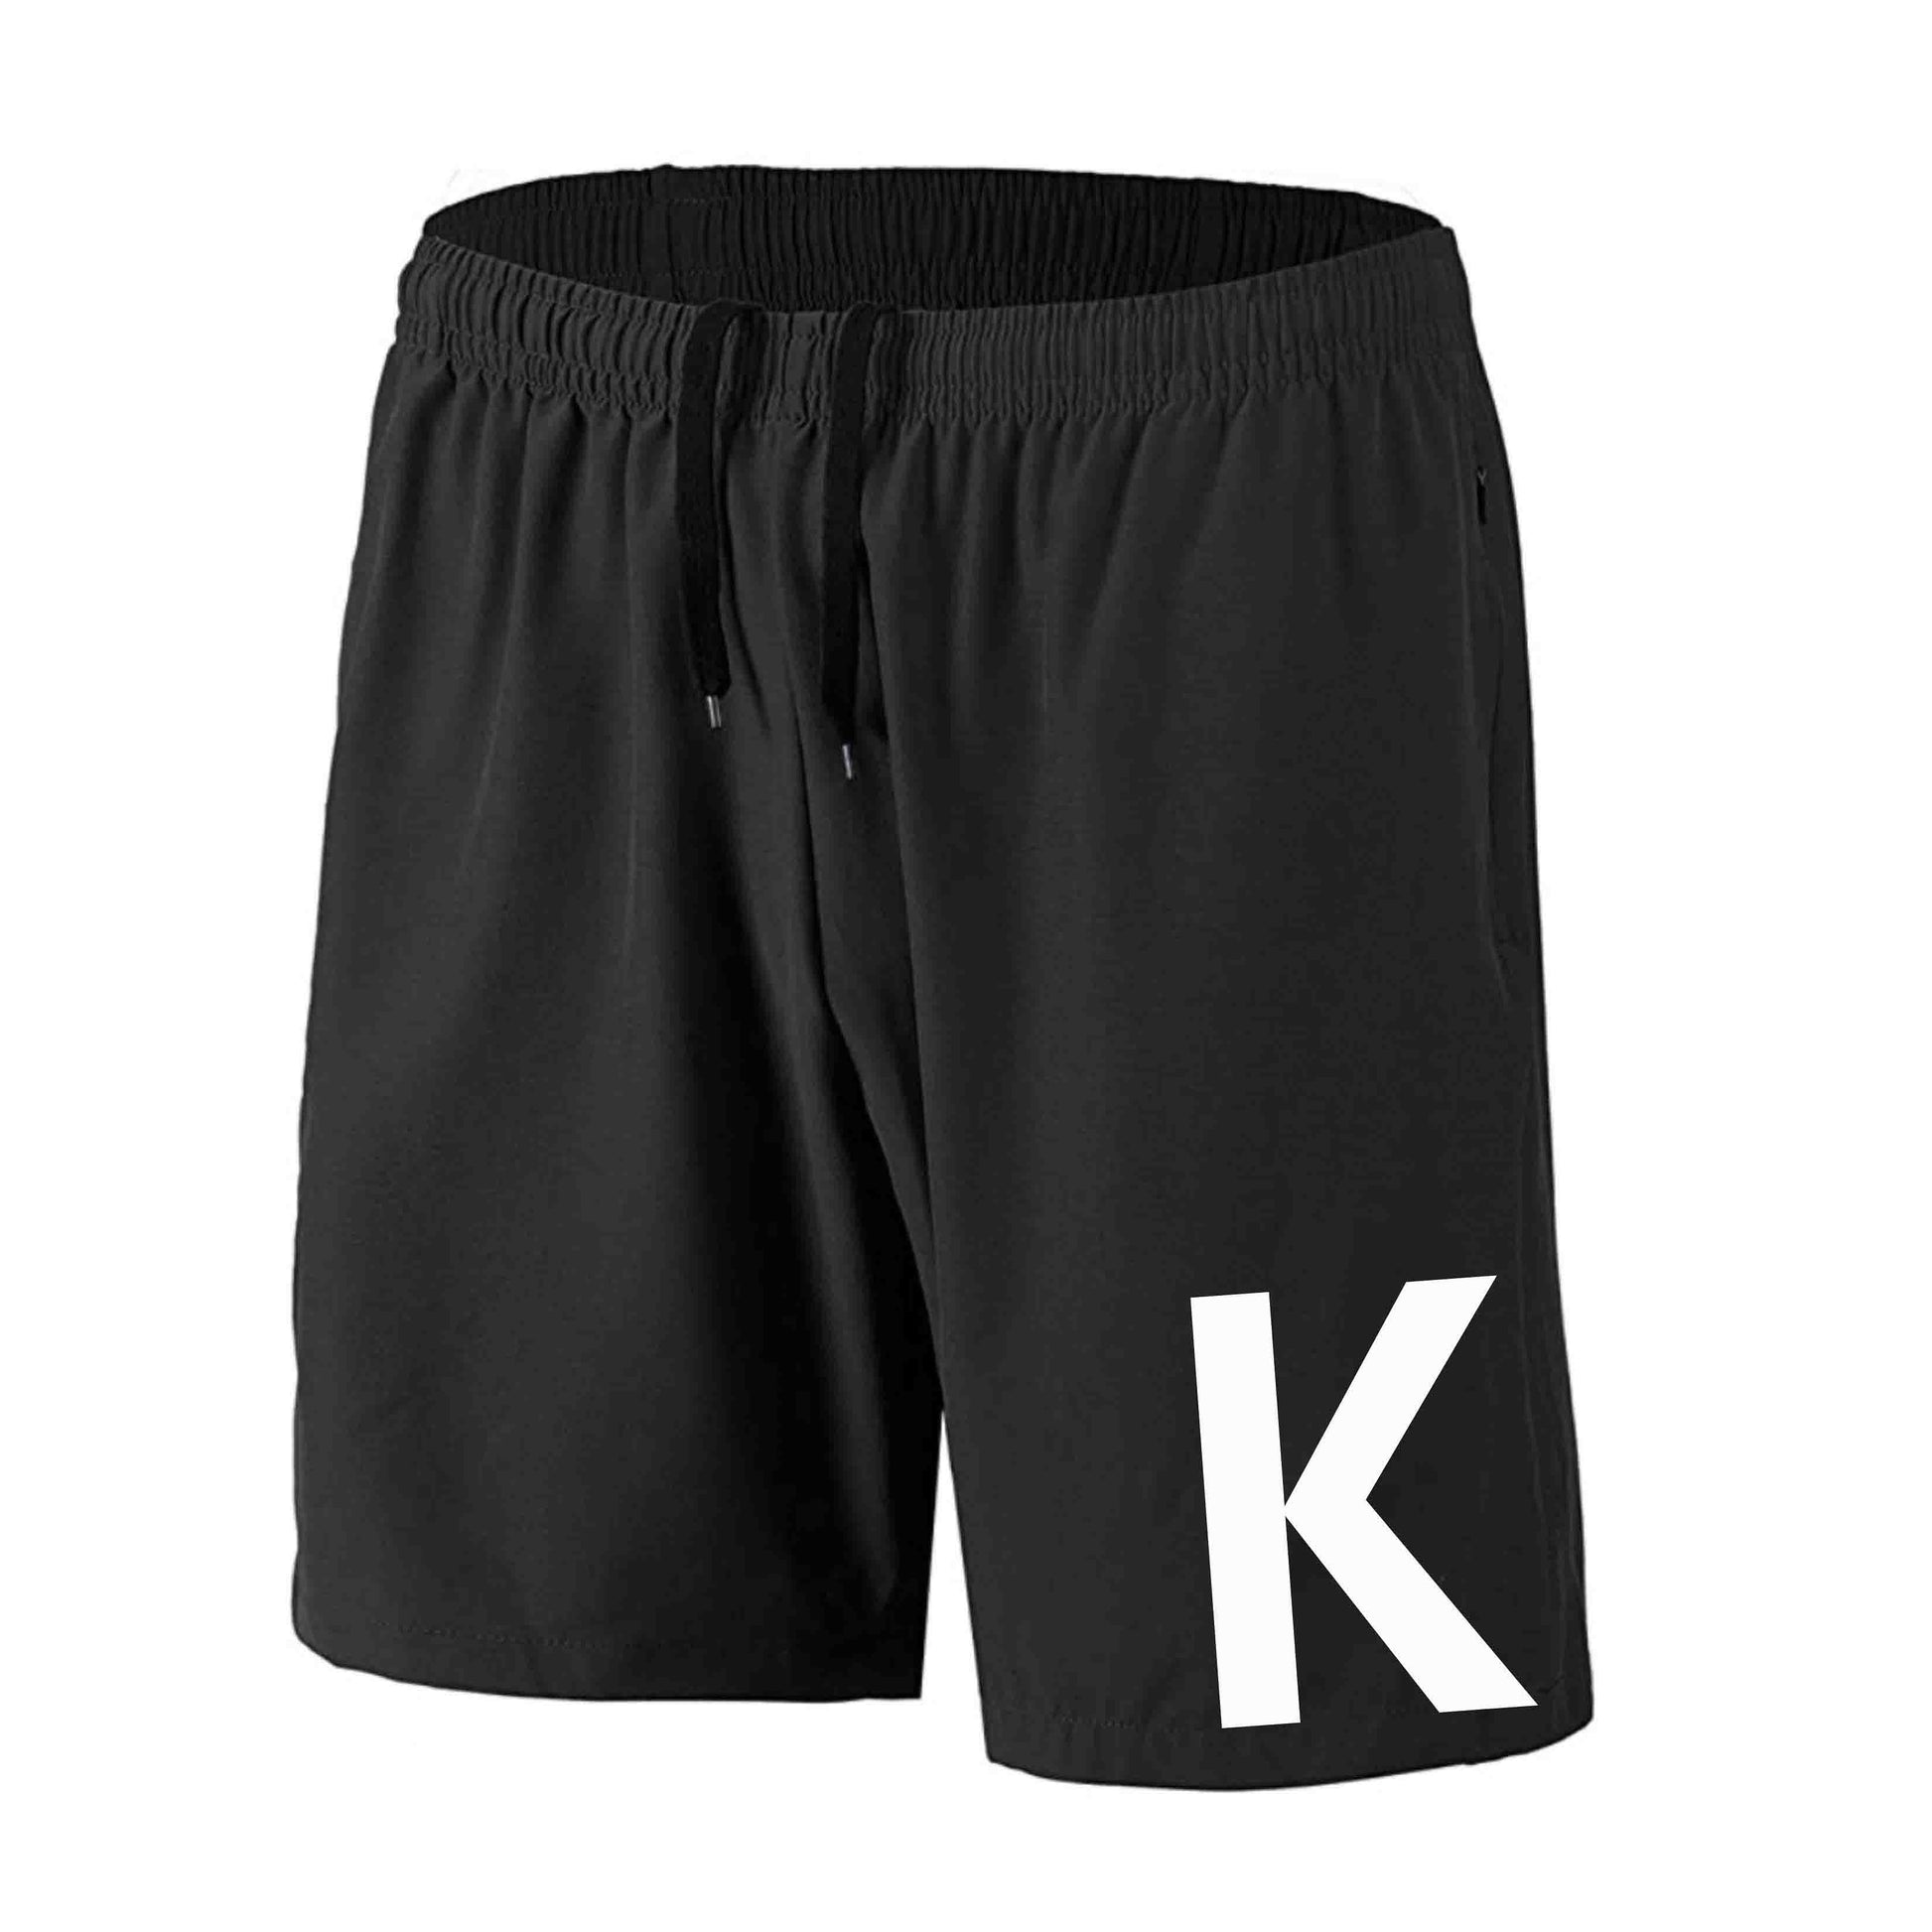 Nutcase Personalized Running Fit Shorts for Men  Exercise - Initials - Monogram Nutcase